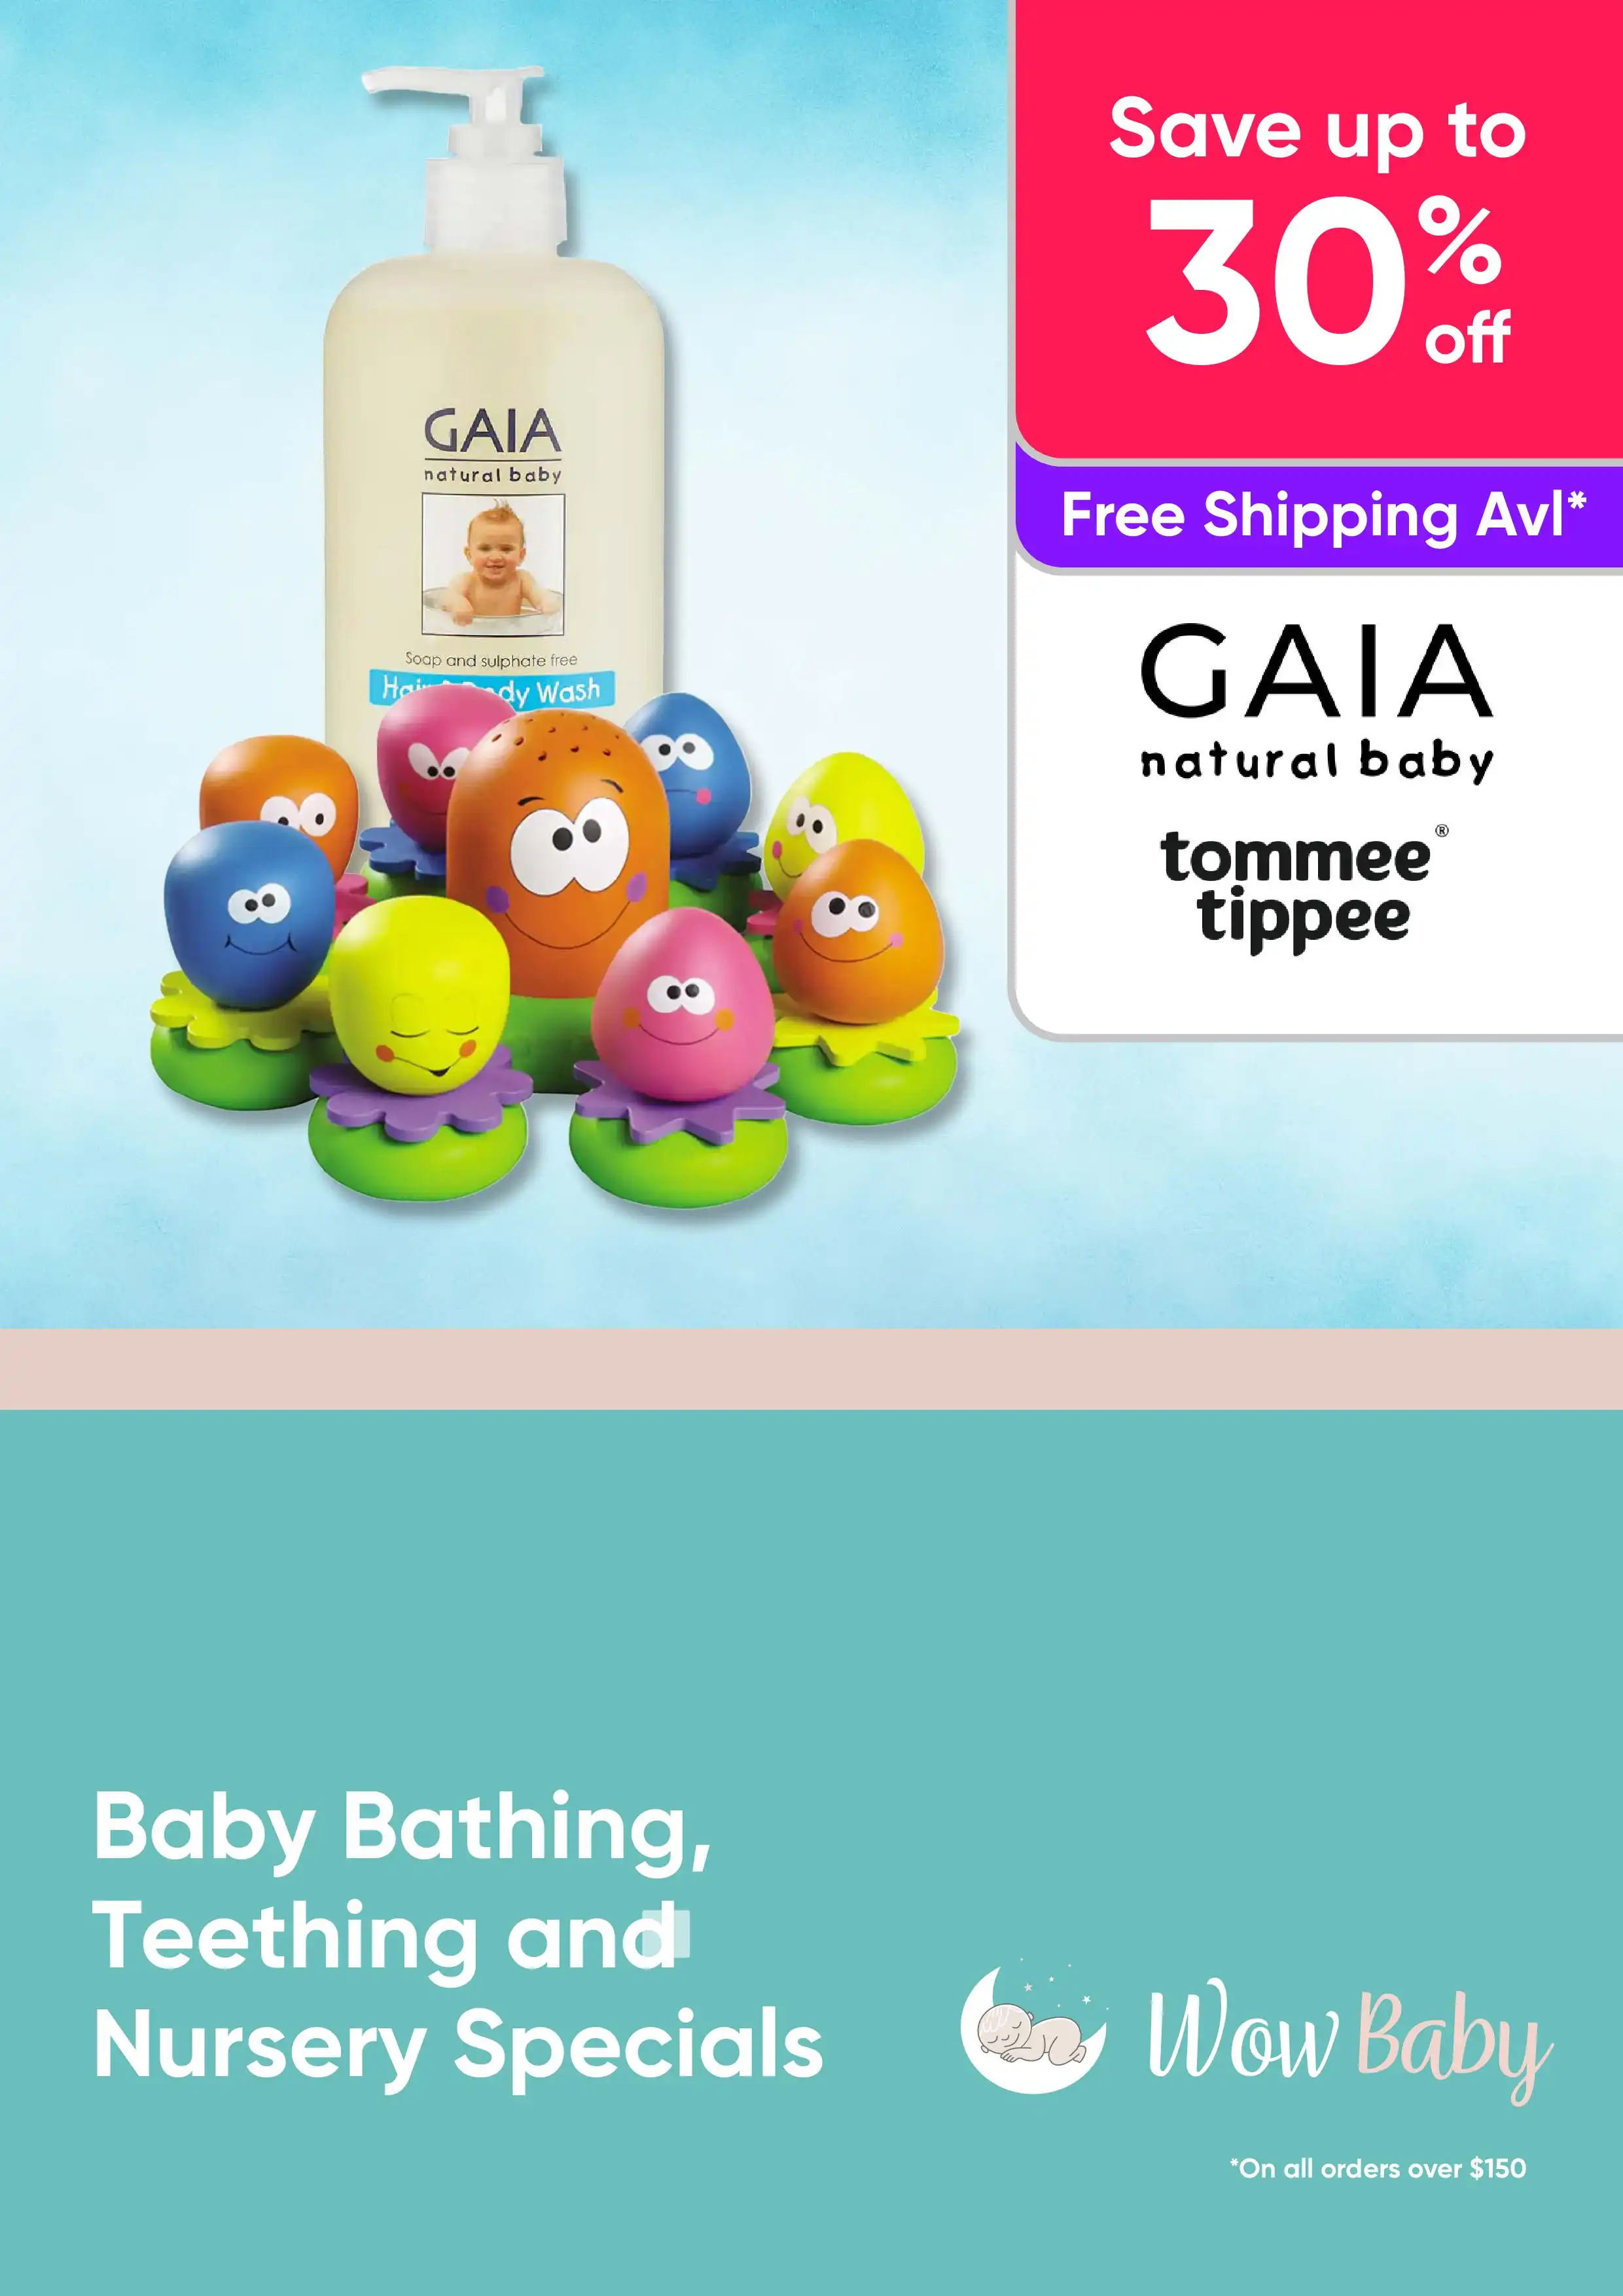 Baby Bathing, Teething and Nursery Specials - Pacifiers, Body Washes and More - Save up to 30% off